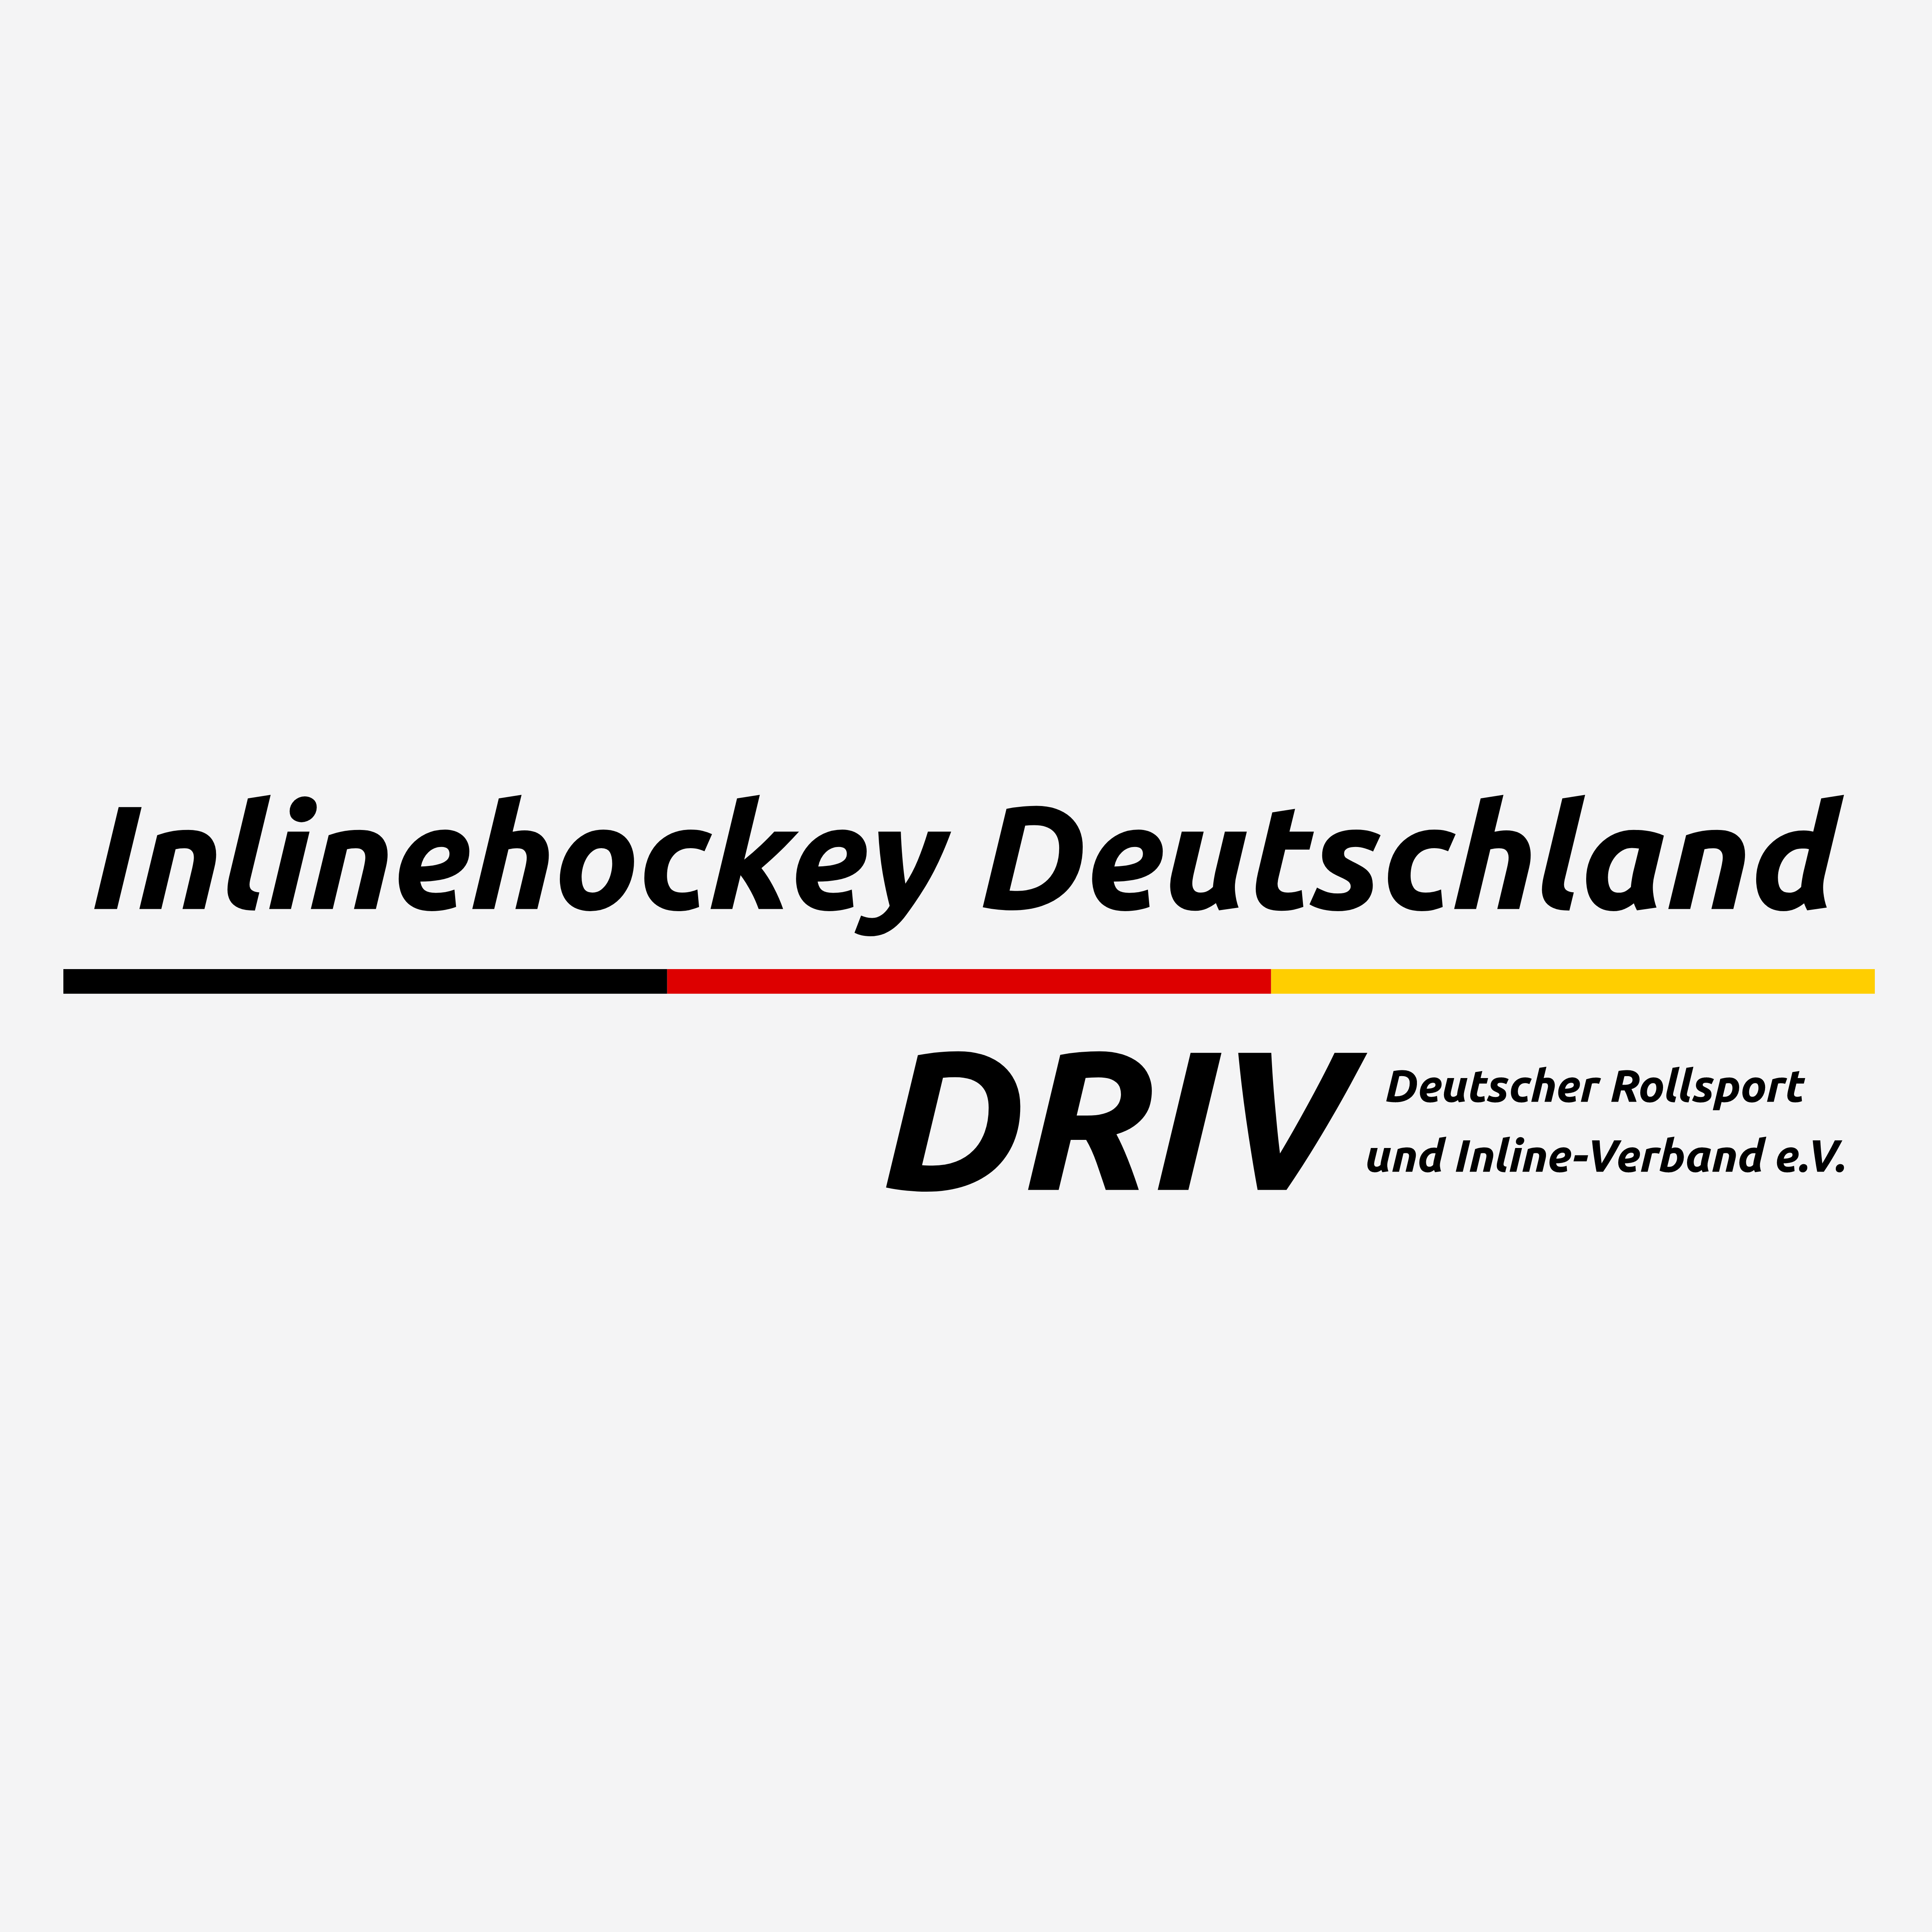 Deutschland Report: Team Germany Promising New Faces Join Core Team, Coach Very Happy!